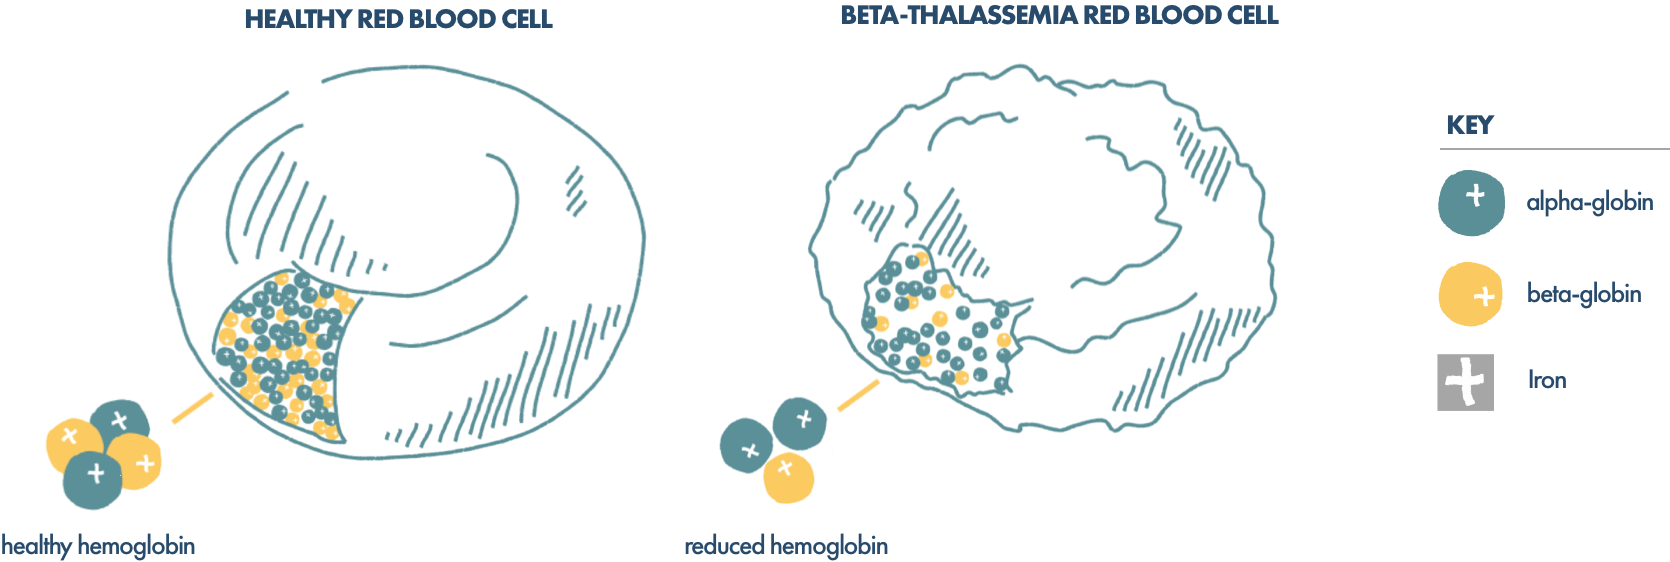 Illustration of a healthy red blood cell vs. a beta thalassemia red blood cell